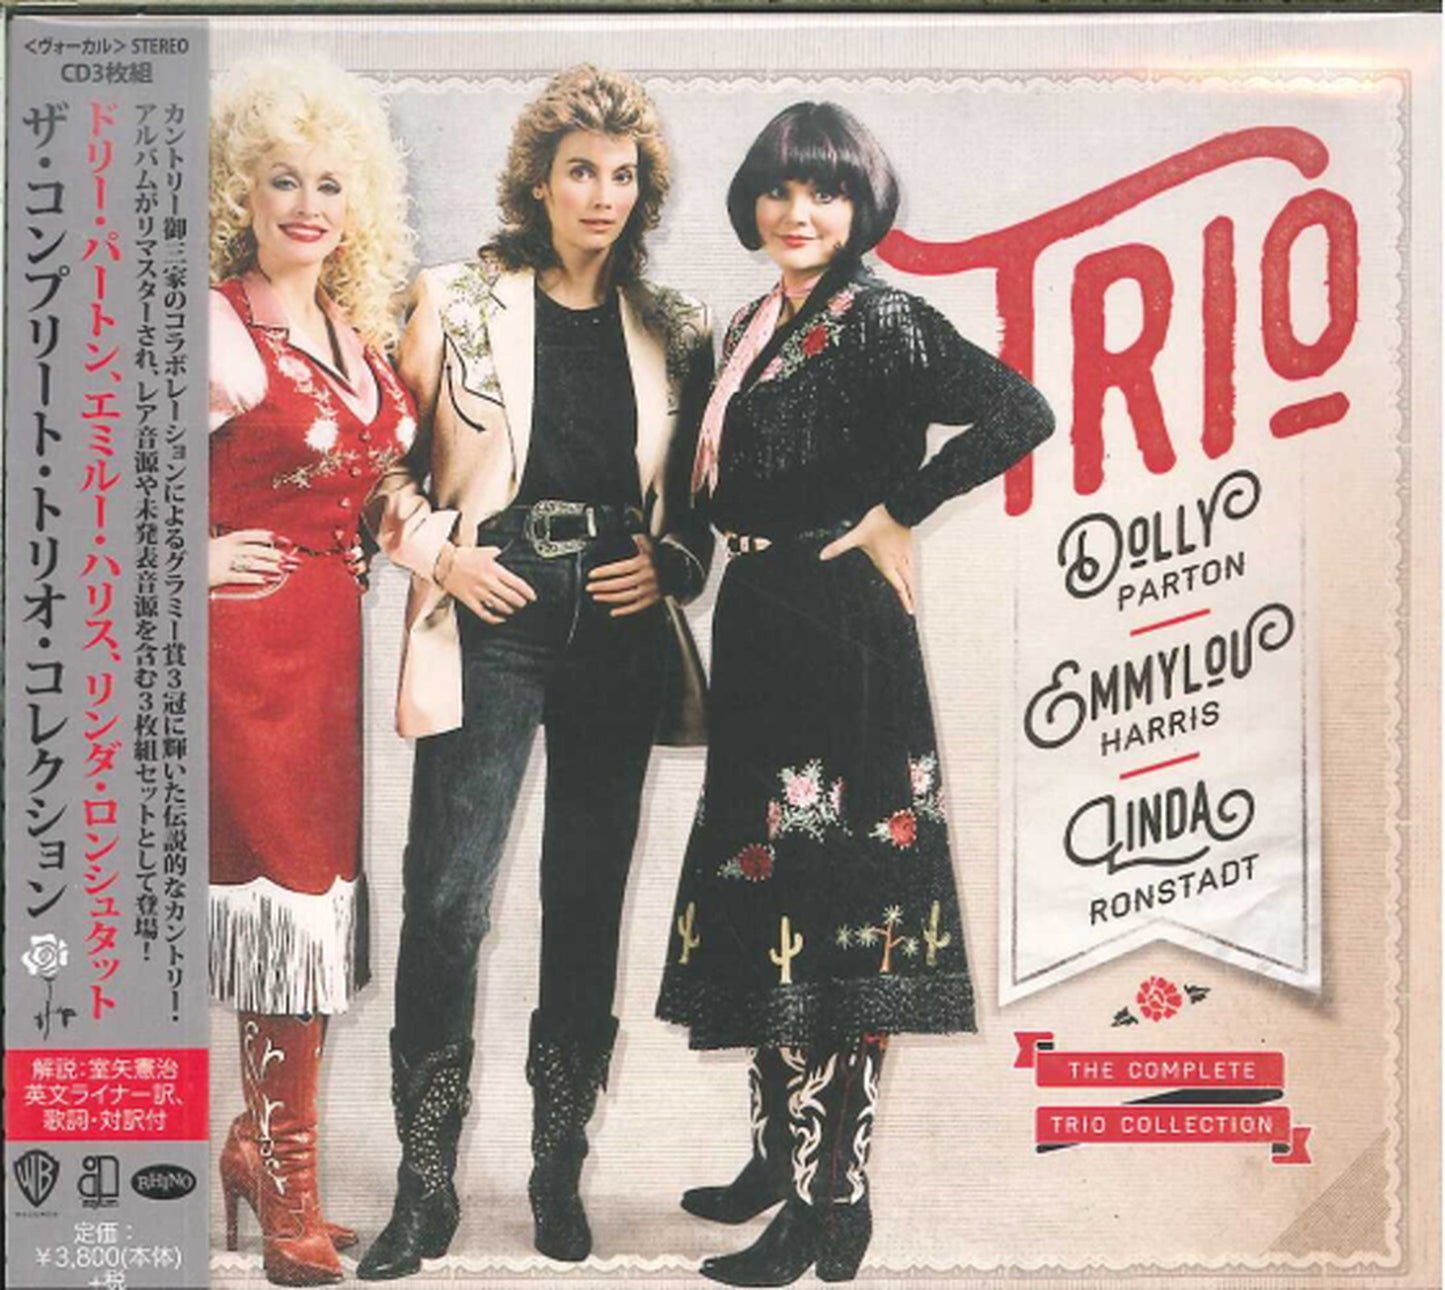 Dolly Parton. Linda Ronstadt. Emmylou Harris - The Complete Trio Collection - Japan  3 CD